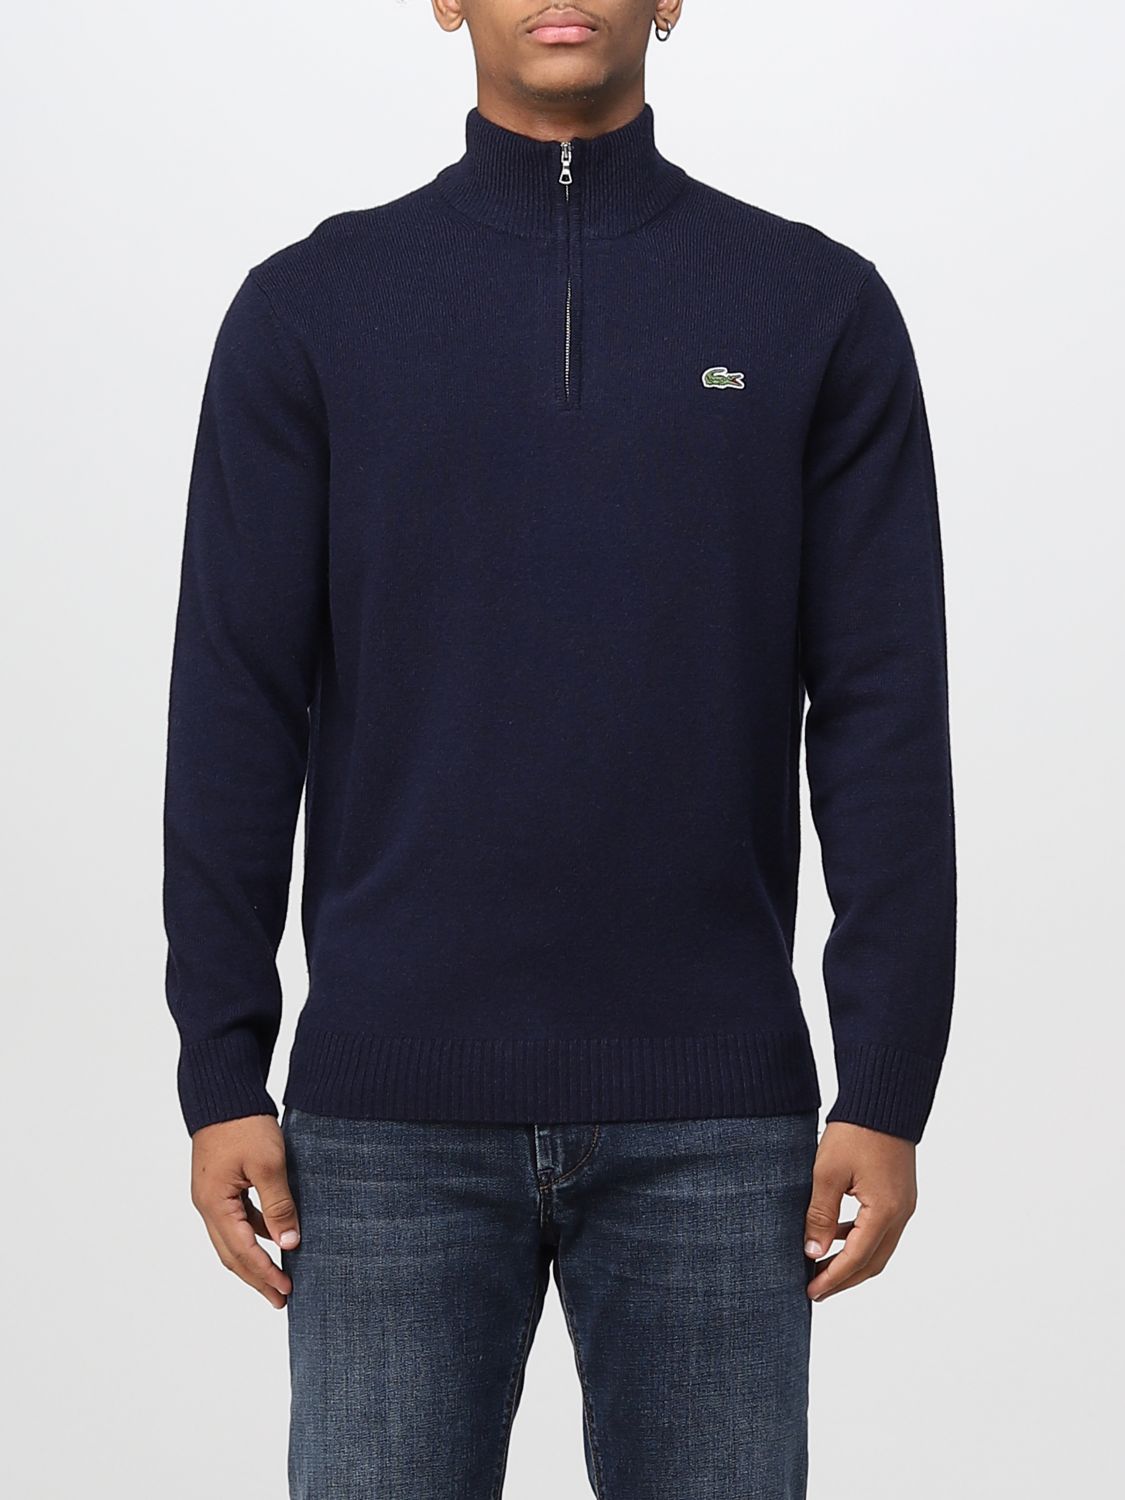 Holde Gemme Prelude LACOSTE: sweater for man - Navy | Lacoste sweater AH1953 online on  GIGLIO.COM